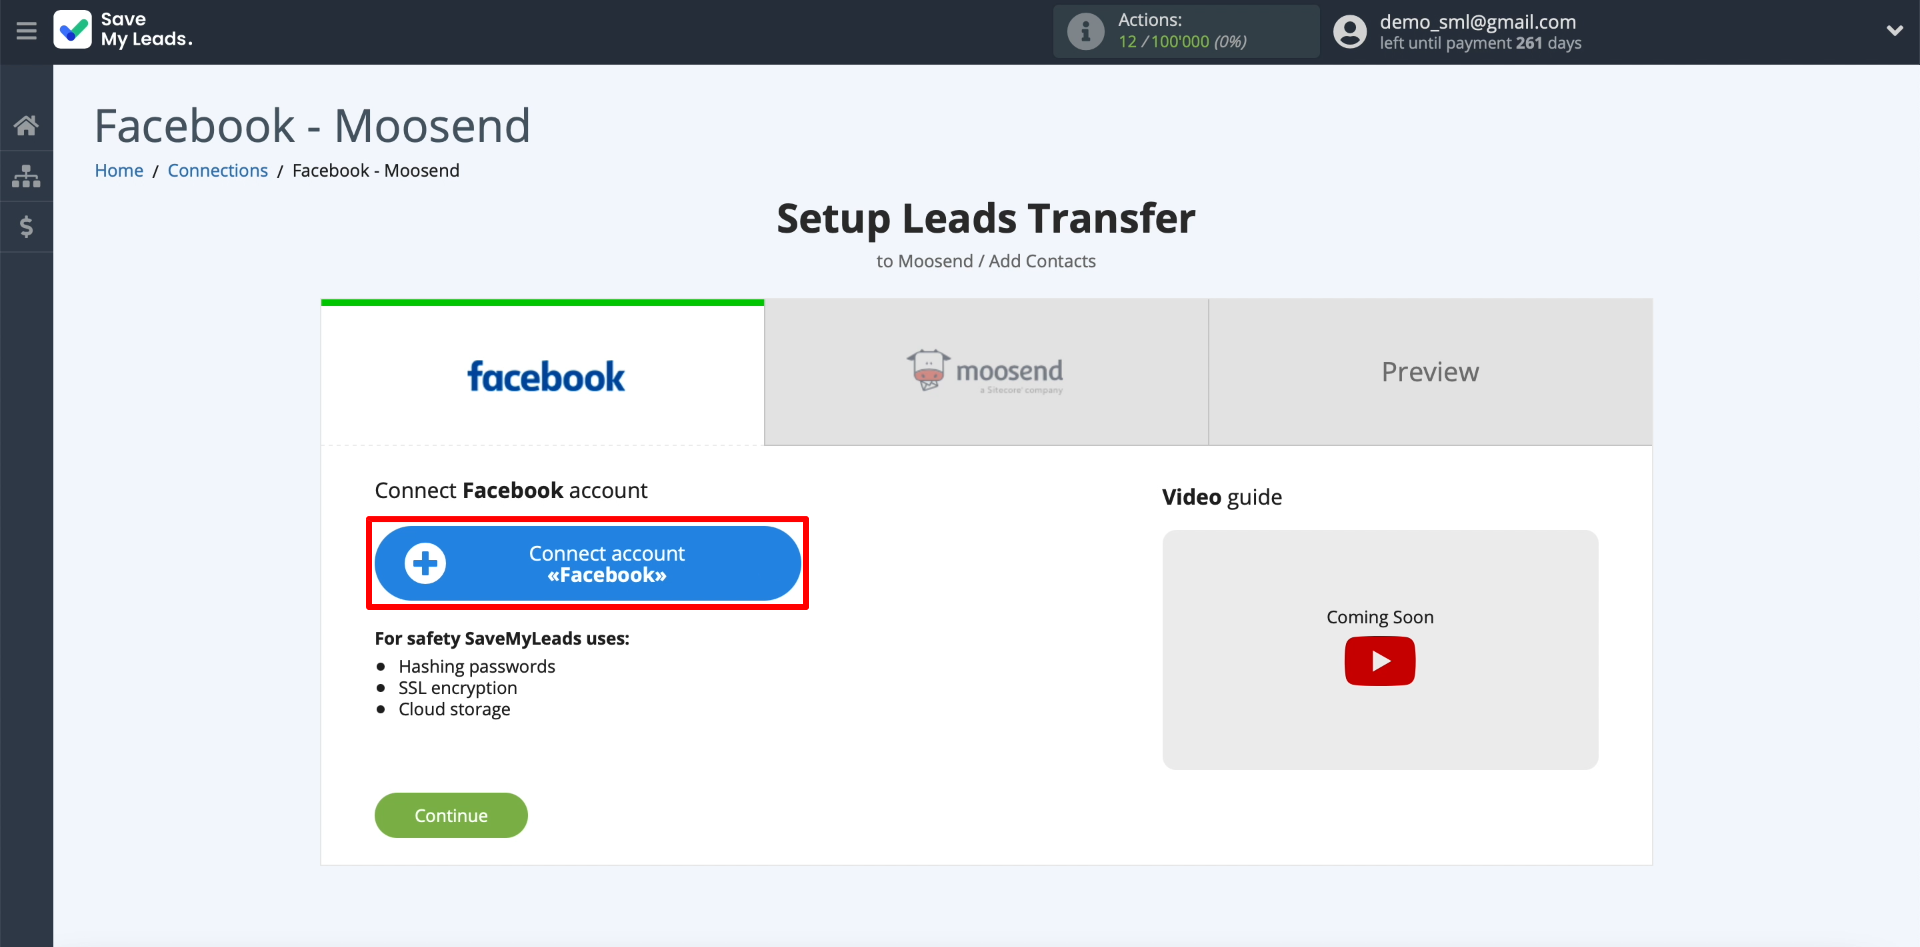 How to set up the upload of new leads from your Facebook ad account in Moosend | Connect your Facebook account